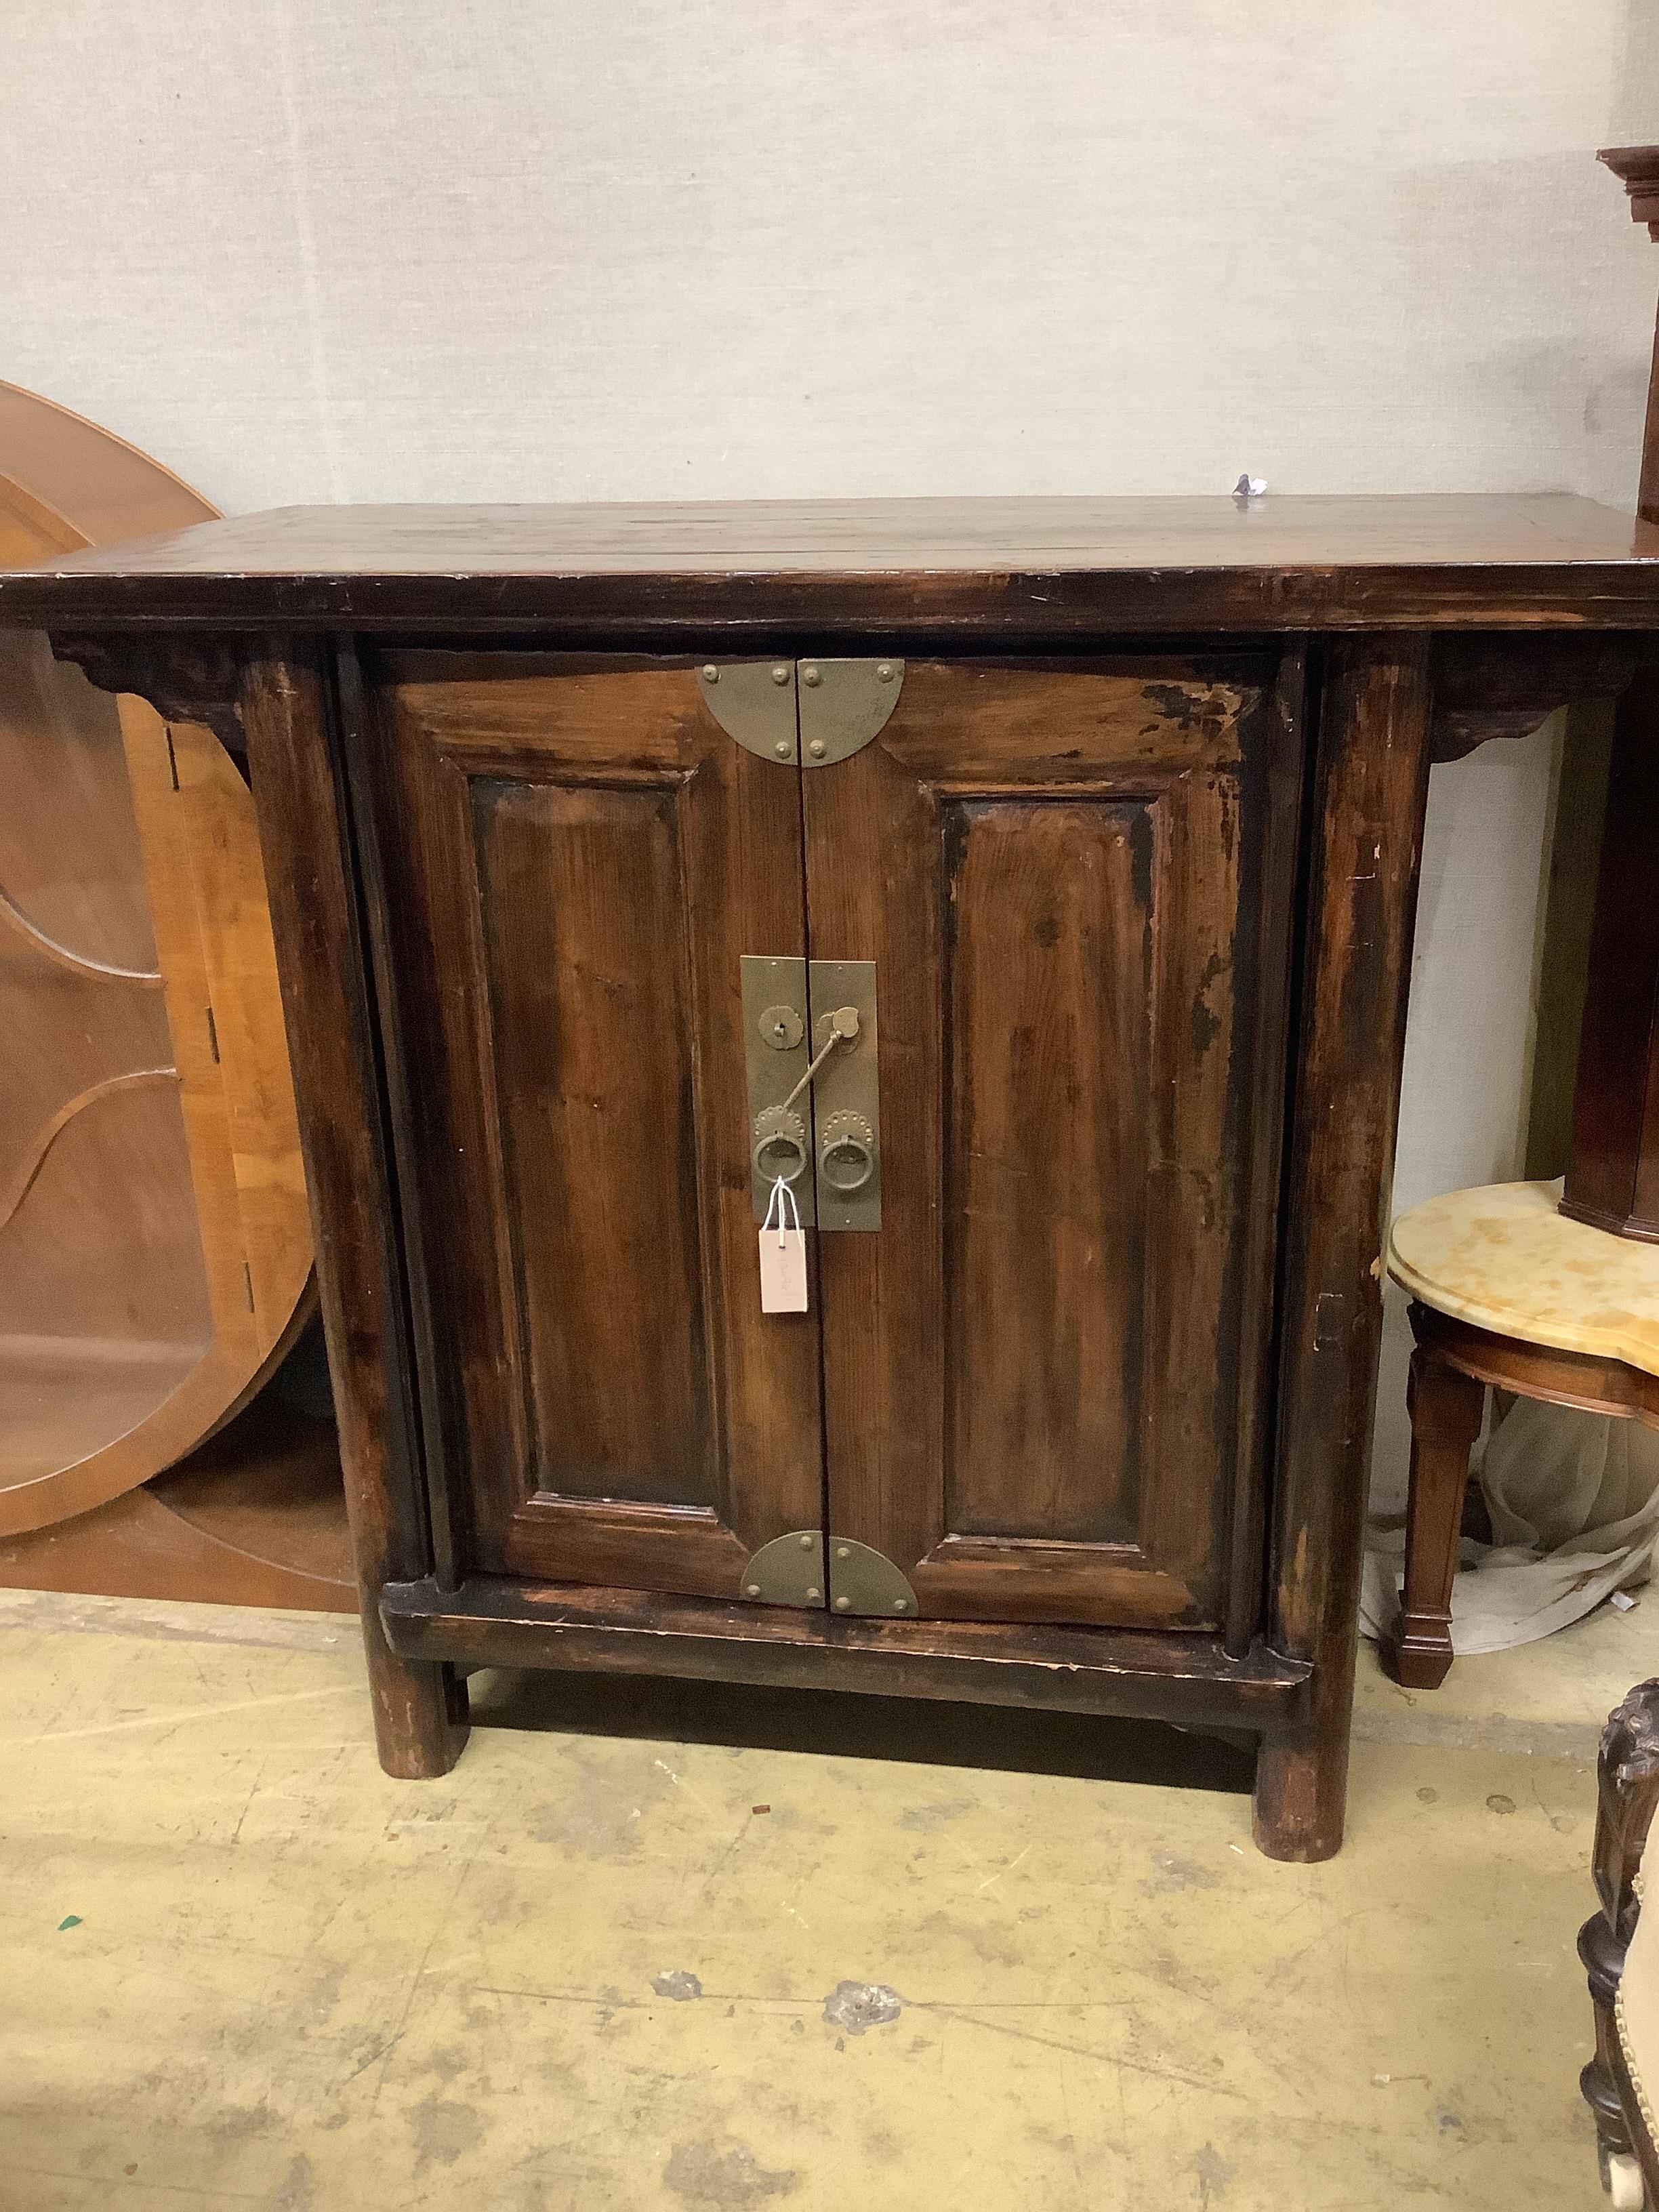 An India Jane Chinese pine two door side cabinet, width 120cm, depth 55cm, height 107cm